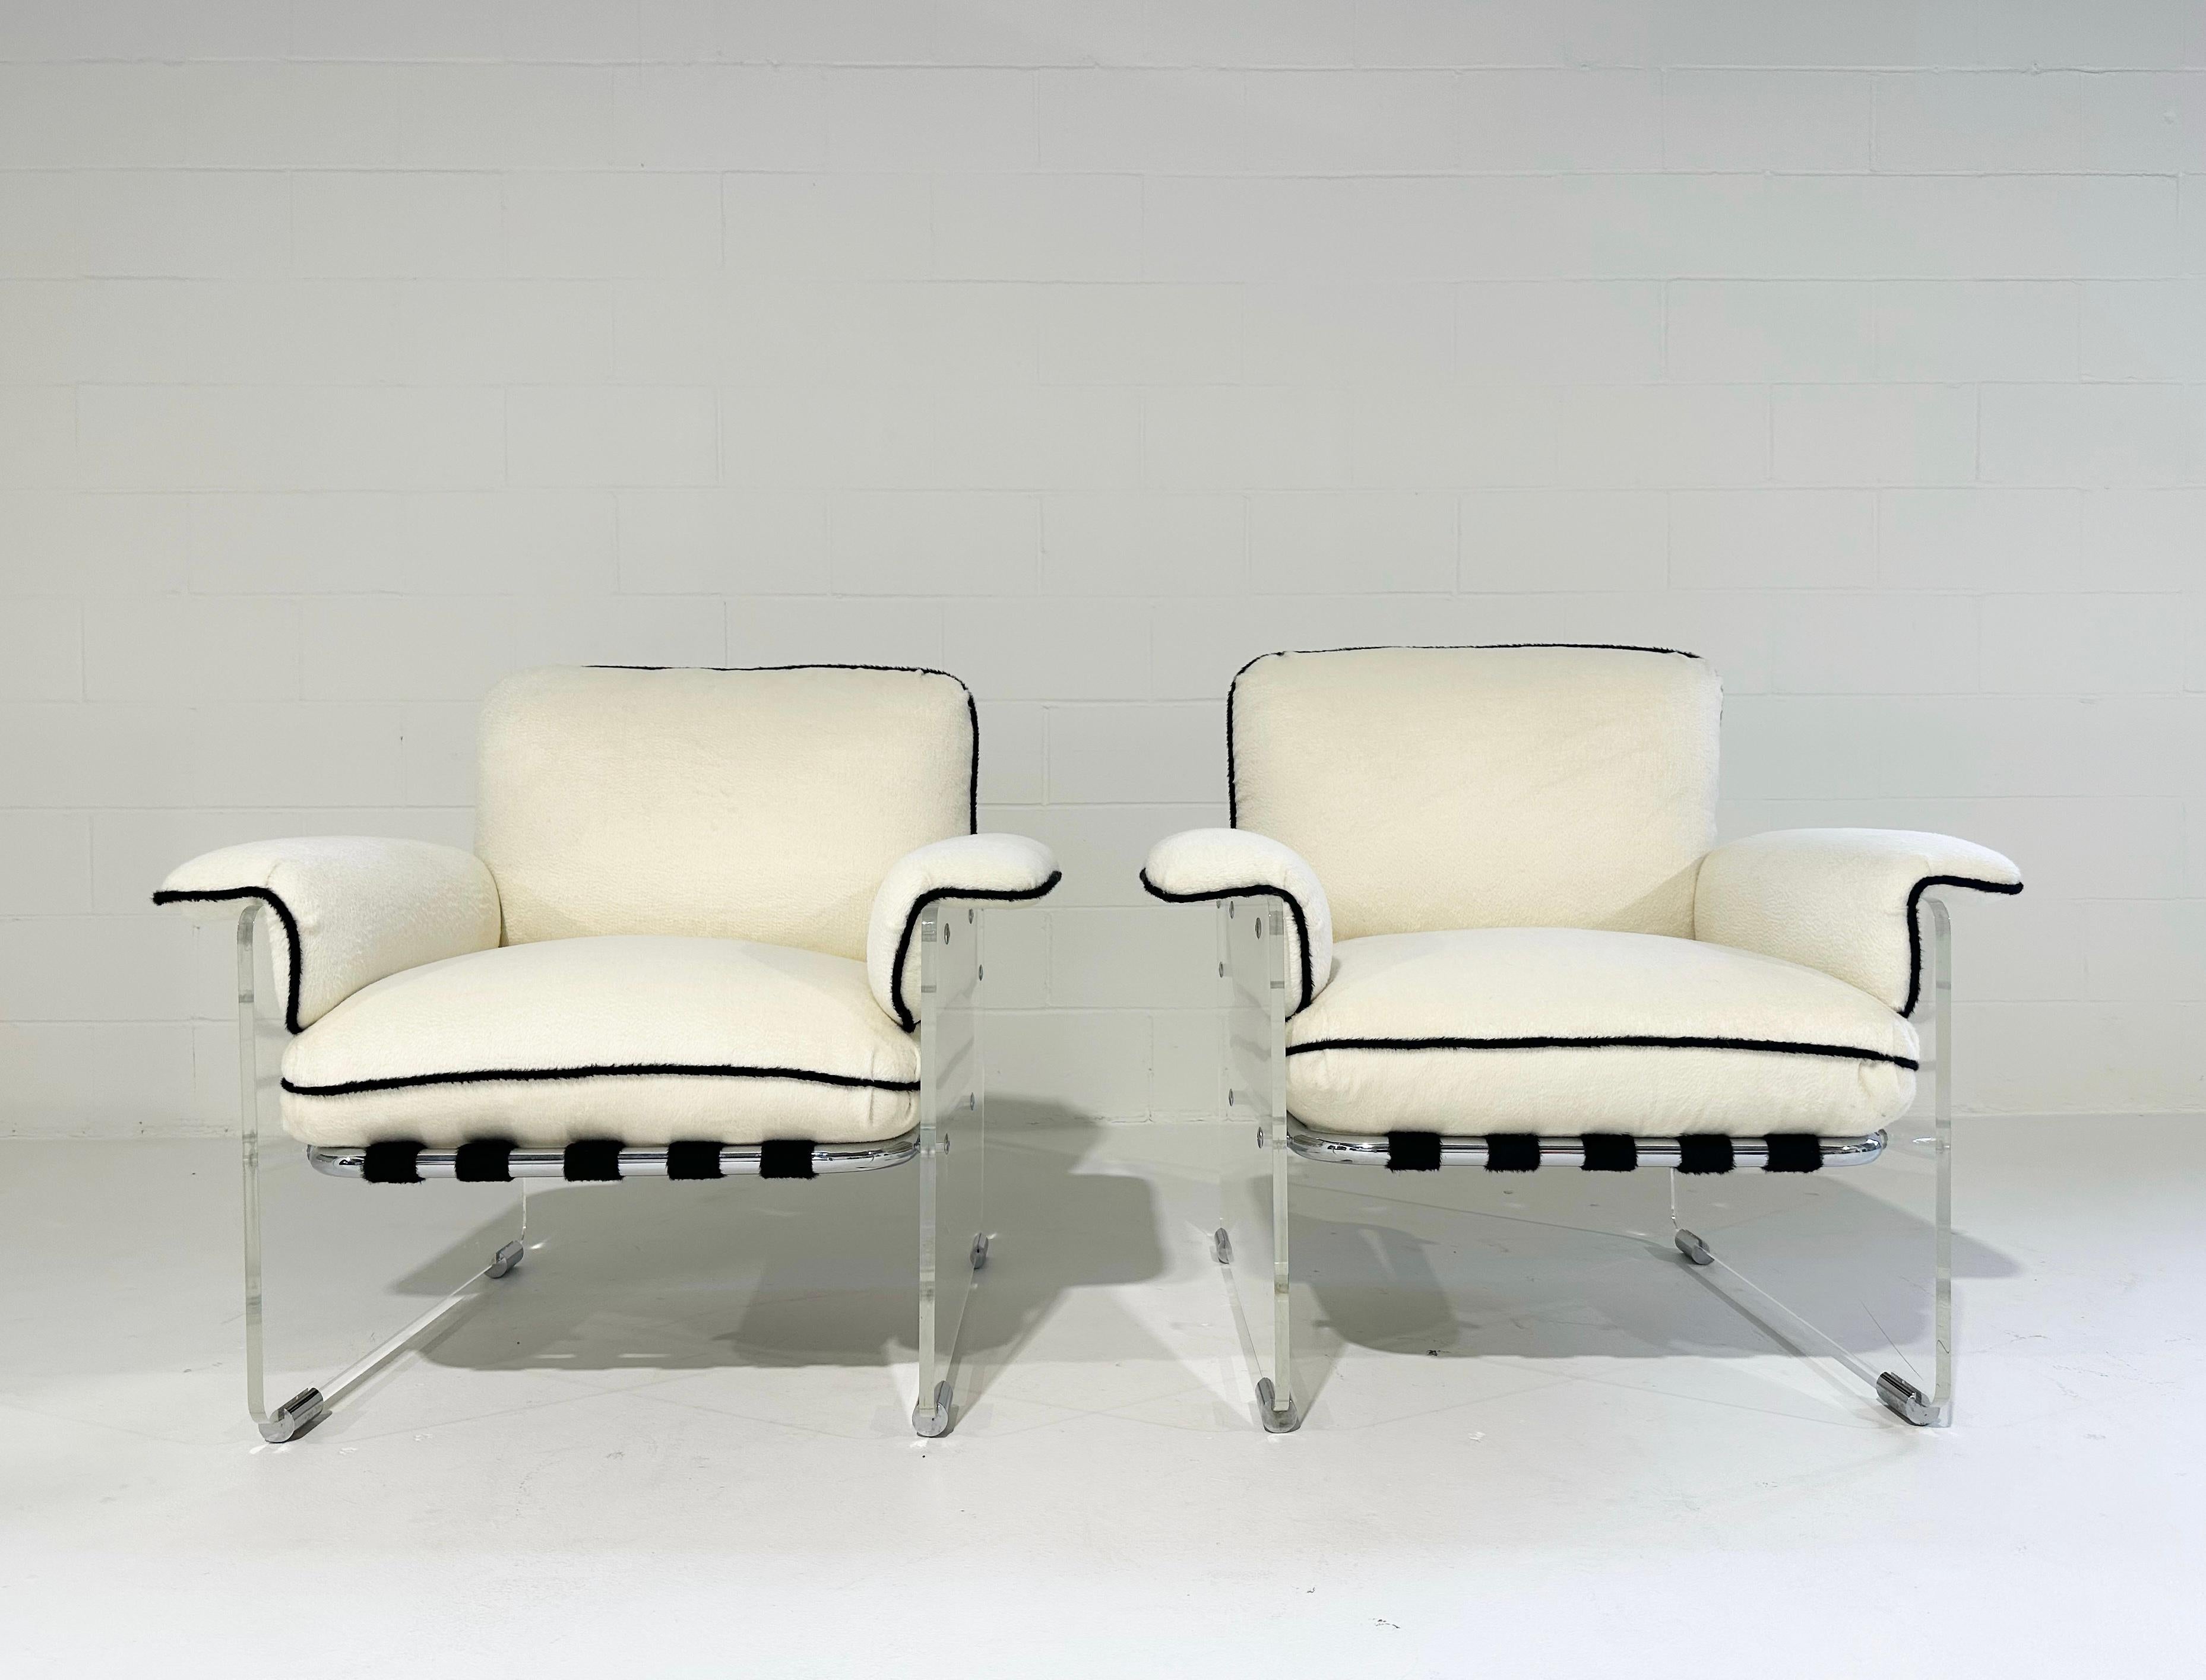 Pace Collection Argenta Lucite Chairs in Inata Alpaca Fabric, pair For Sale 7